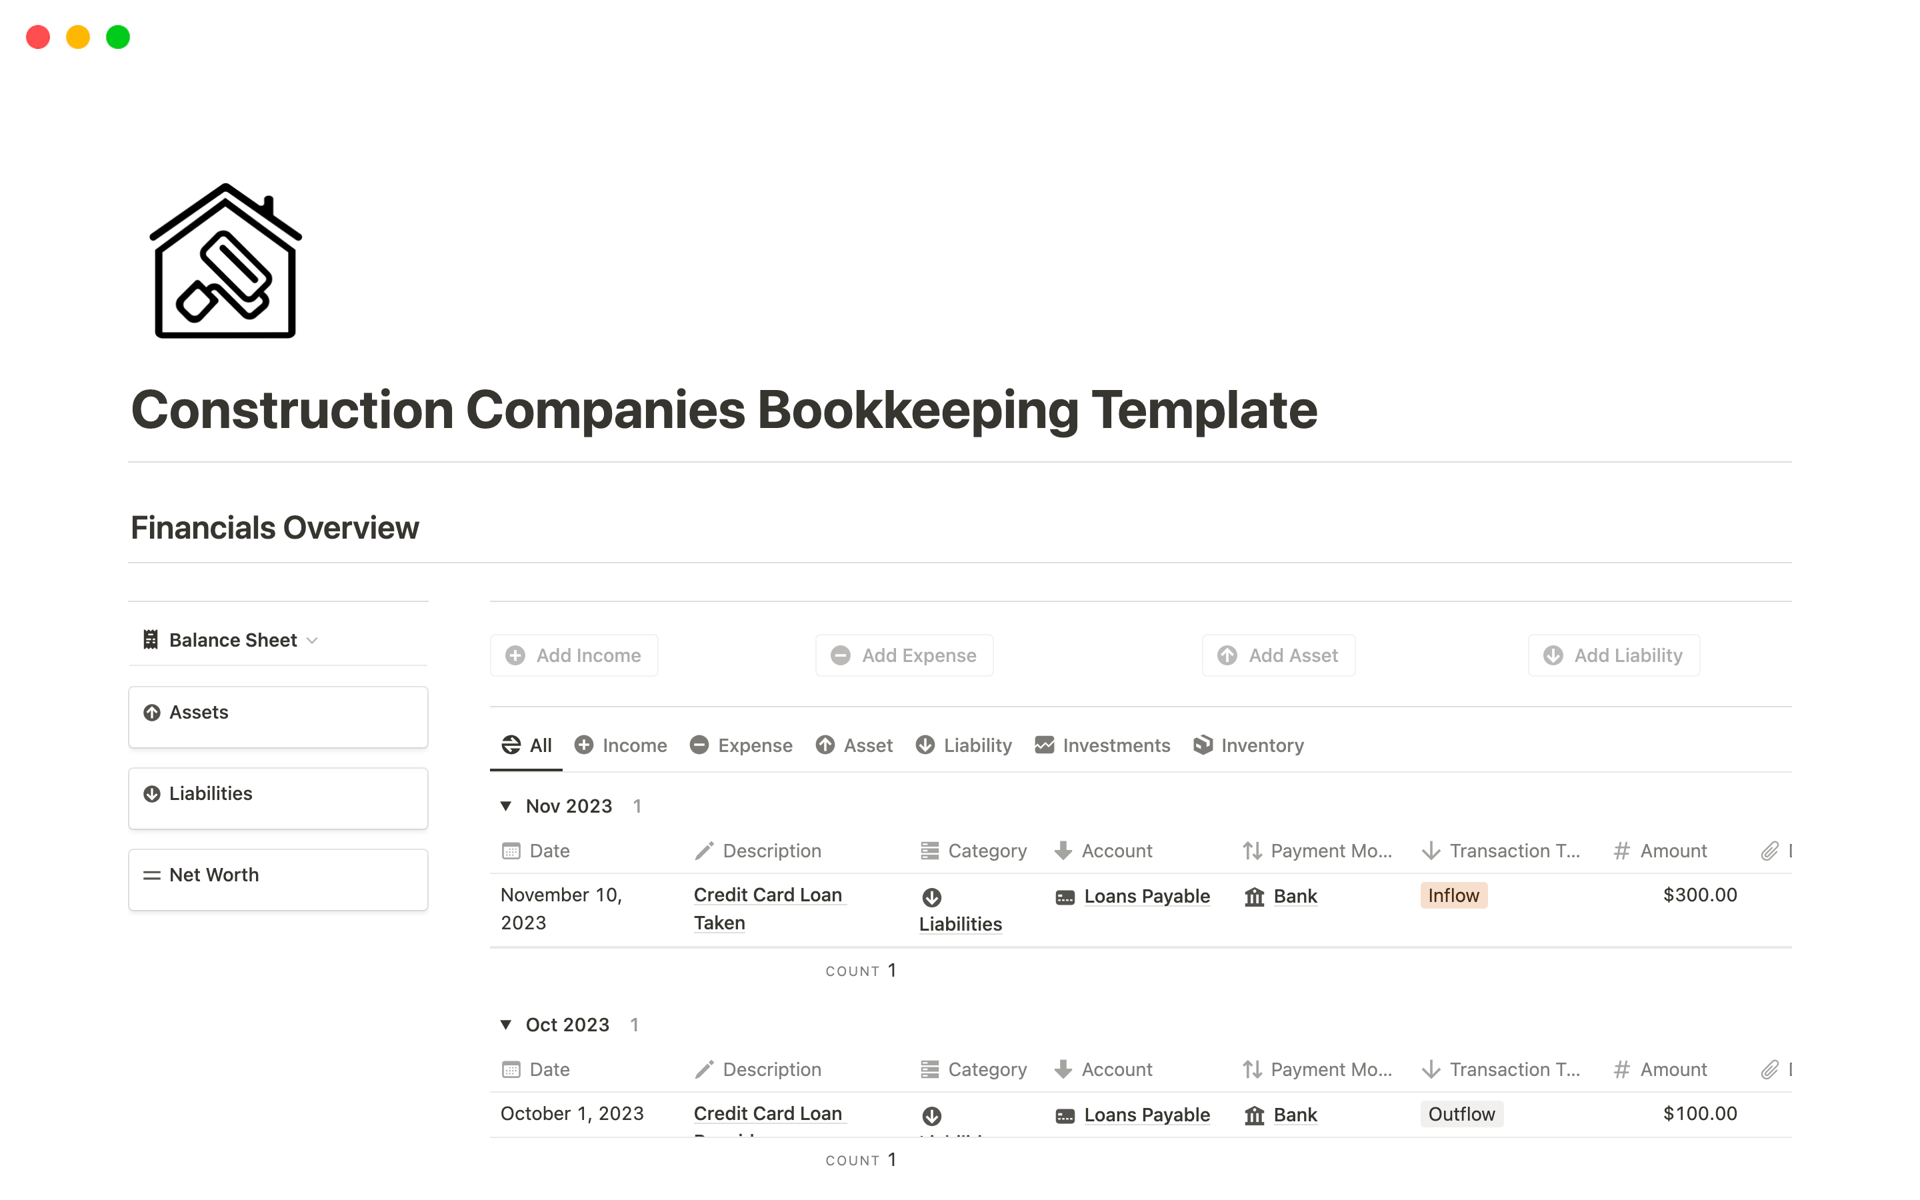 This bookkeeping template is a simple tool designed to help new construction businesses keep track of their money, showing where it comes from and where it goes